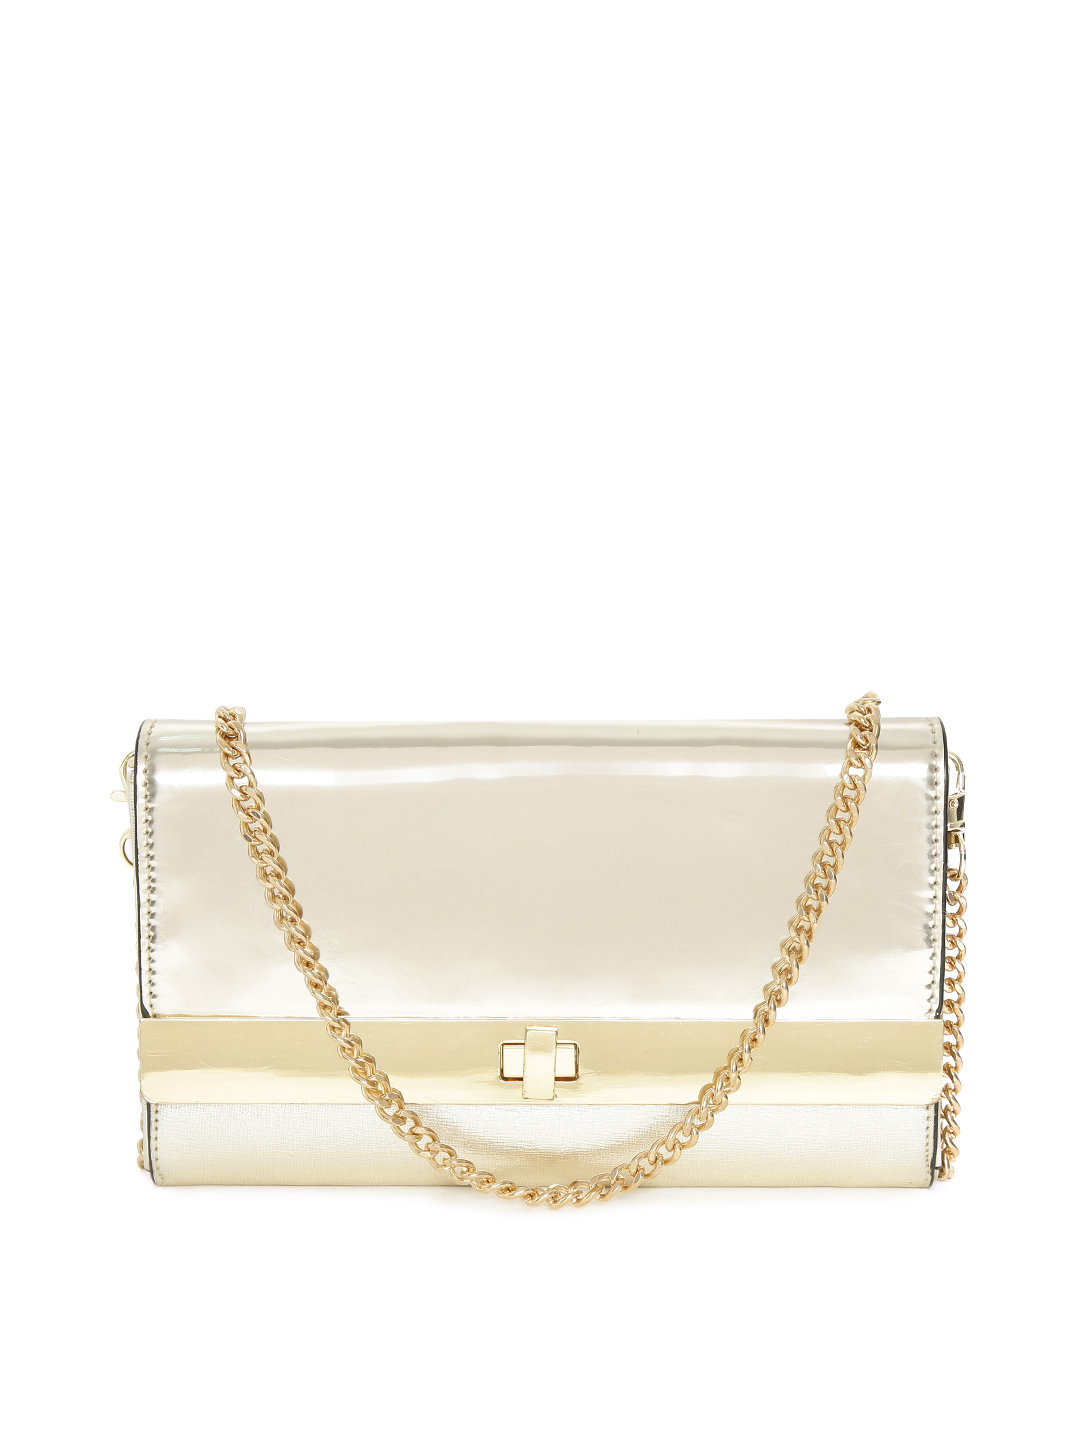 ALDO Gold-Toned Clutch with Chain Strap